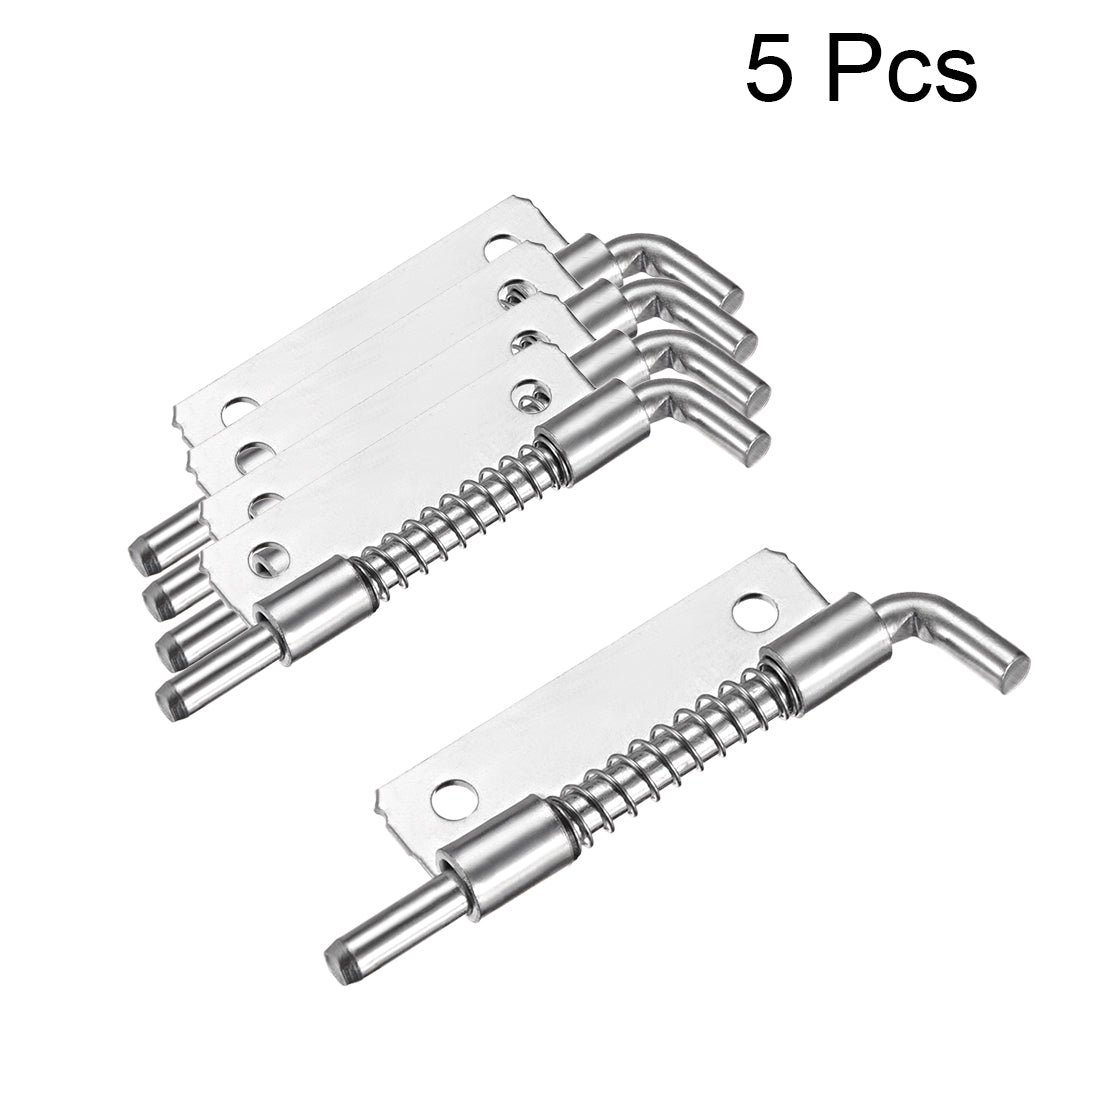 uxcell Uxcell 5pcs Carbon Steel Lock Bolt Spring Loaded Pin Latch 93mm Long (Right)